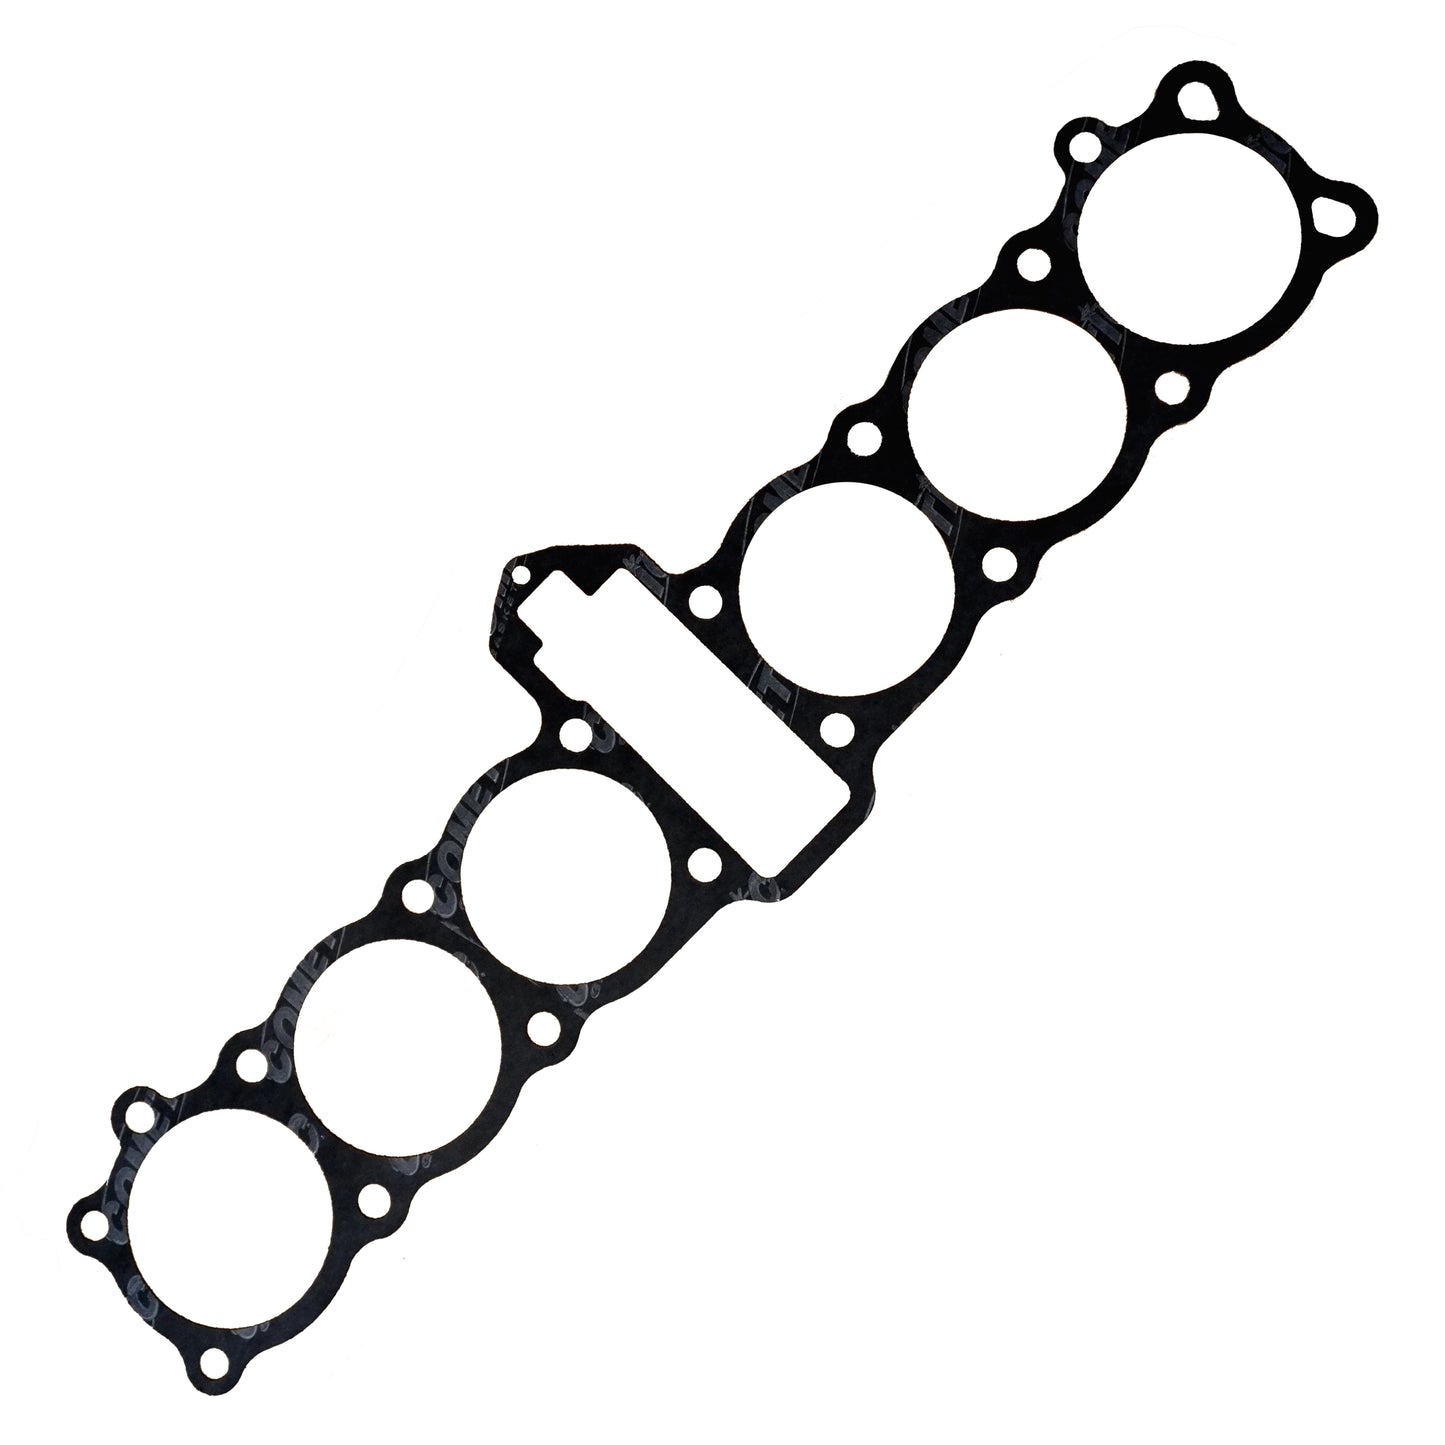 Honda CBX Base Gasket Made in USA by Cometic